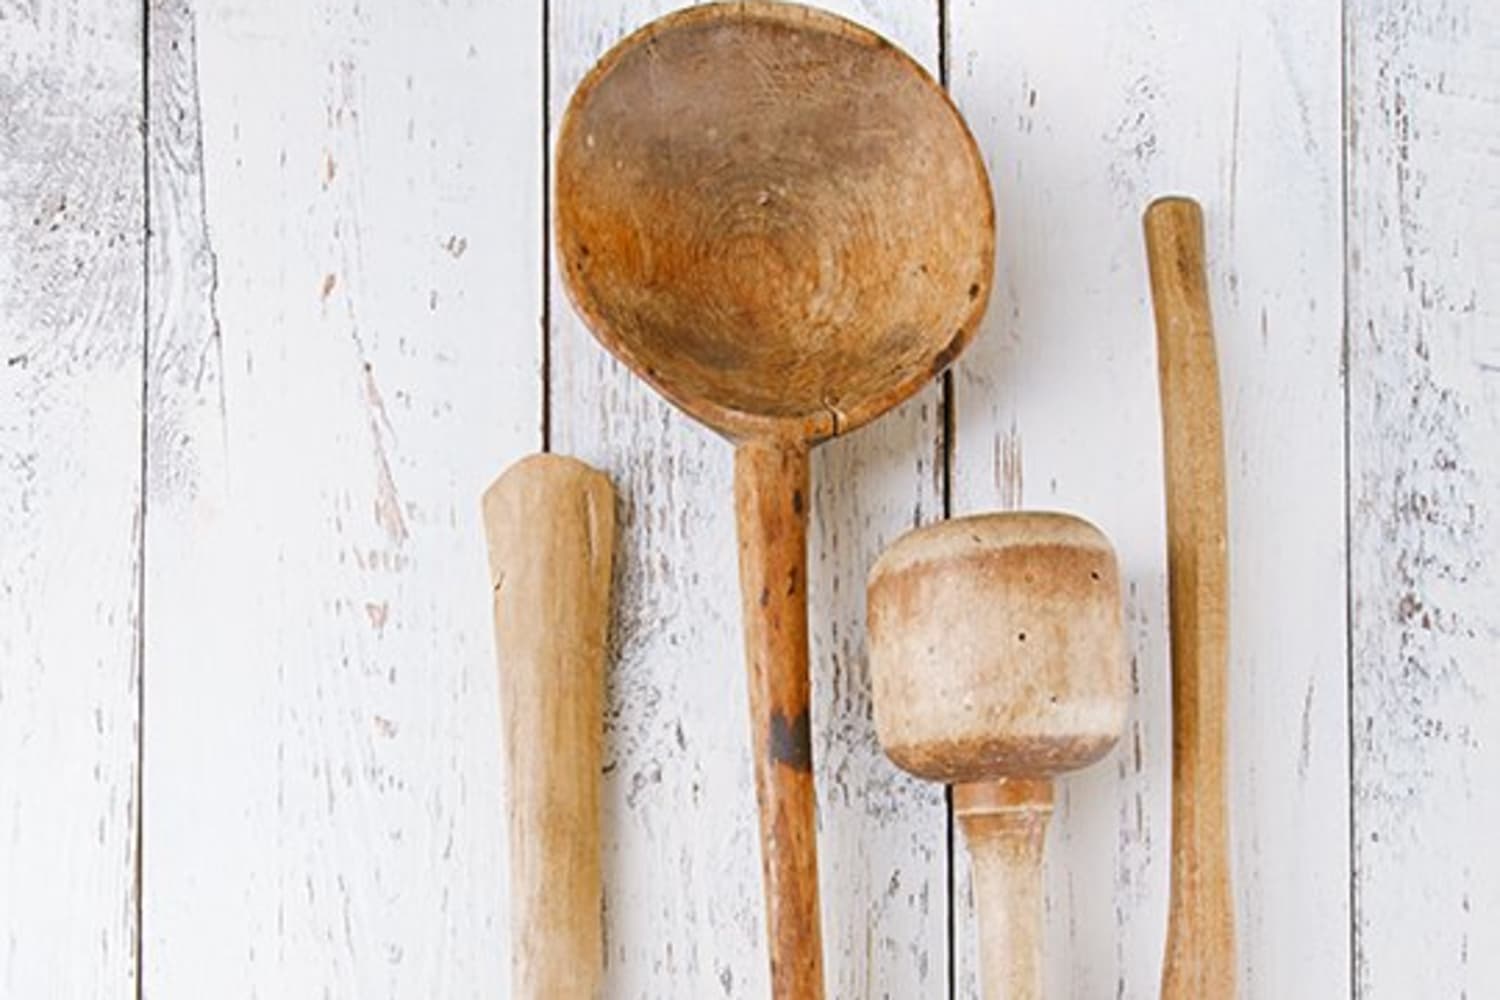 How to Care for Wooden Spoons